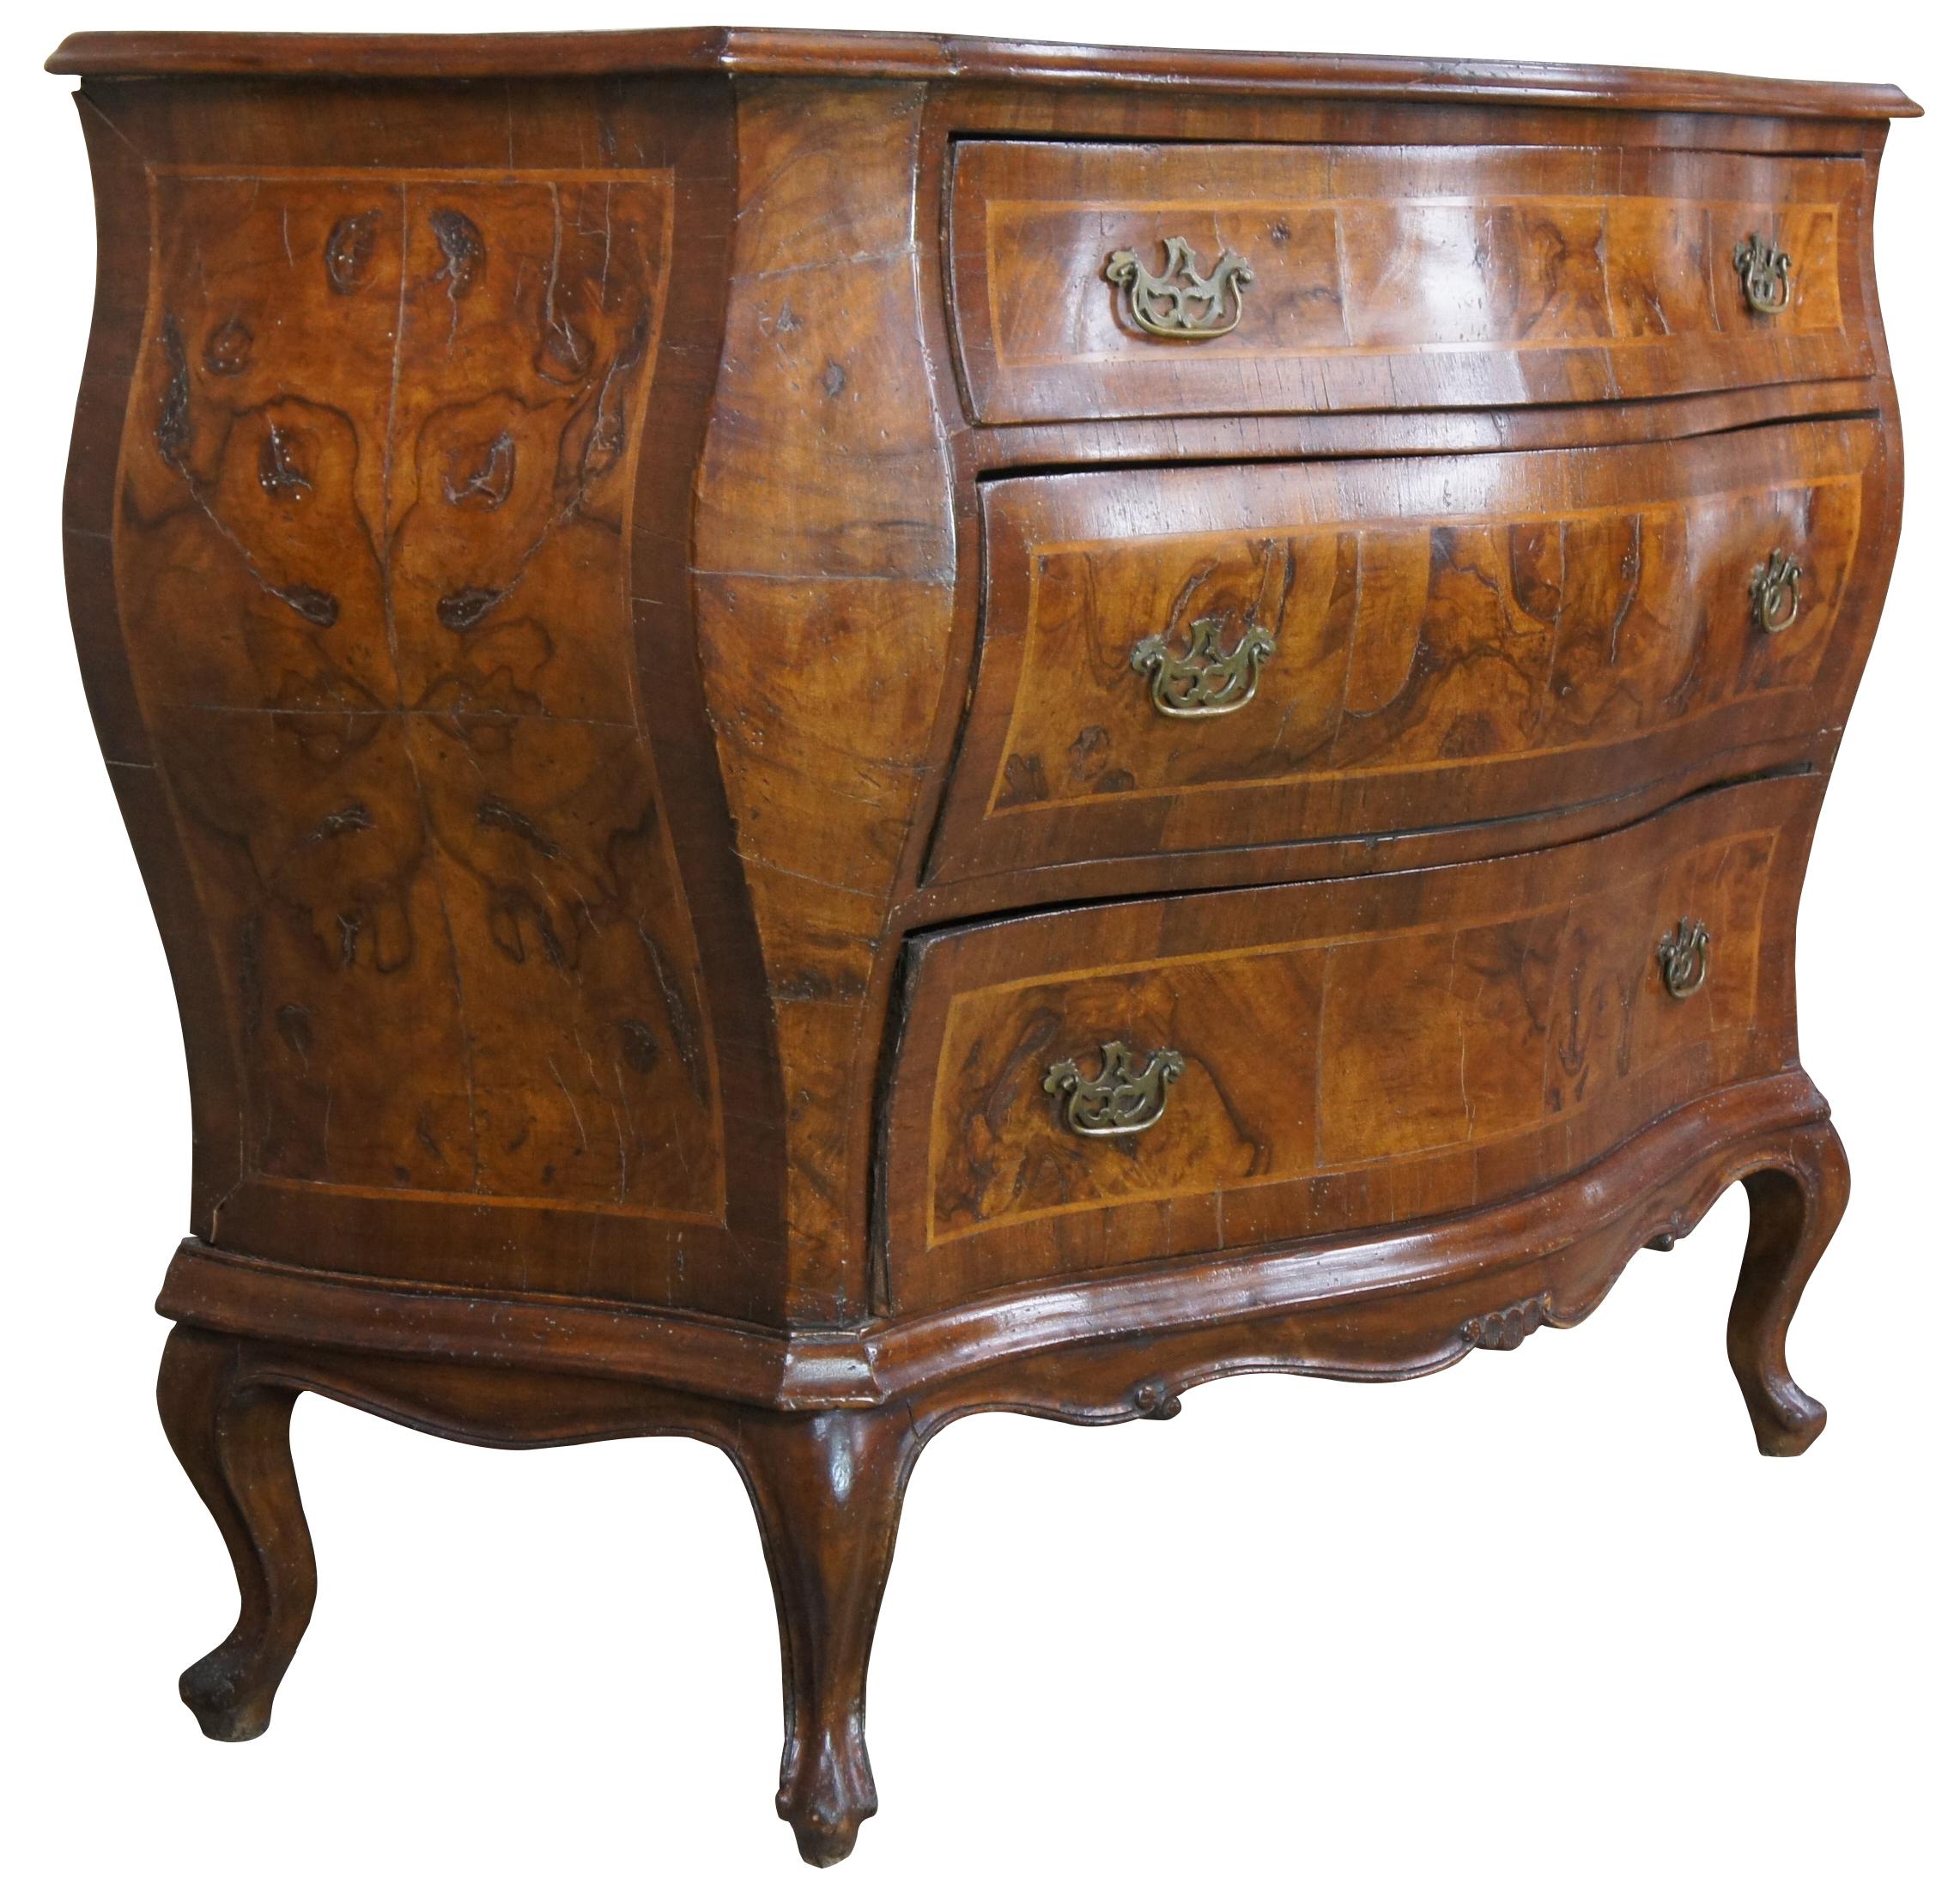 Antique Italian Walnut & Olive Wood Serpentine Bombe Commode Chest Dresser In Good Condition For Sale In Dayton, OH